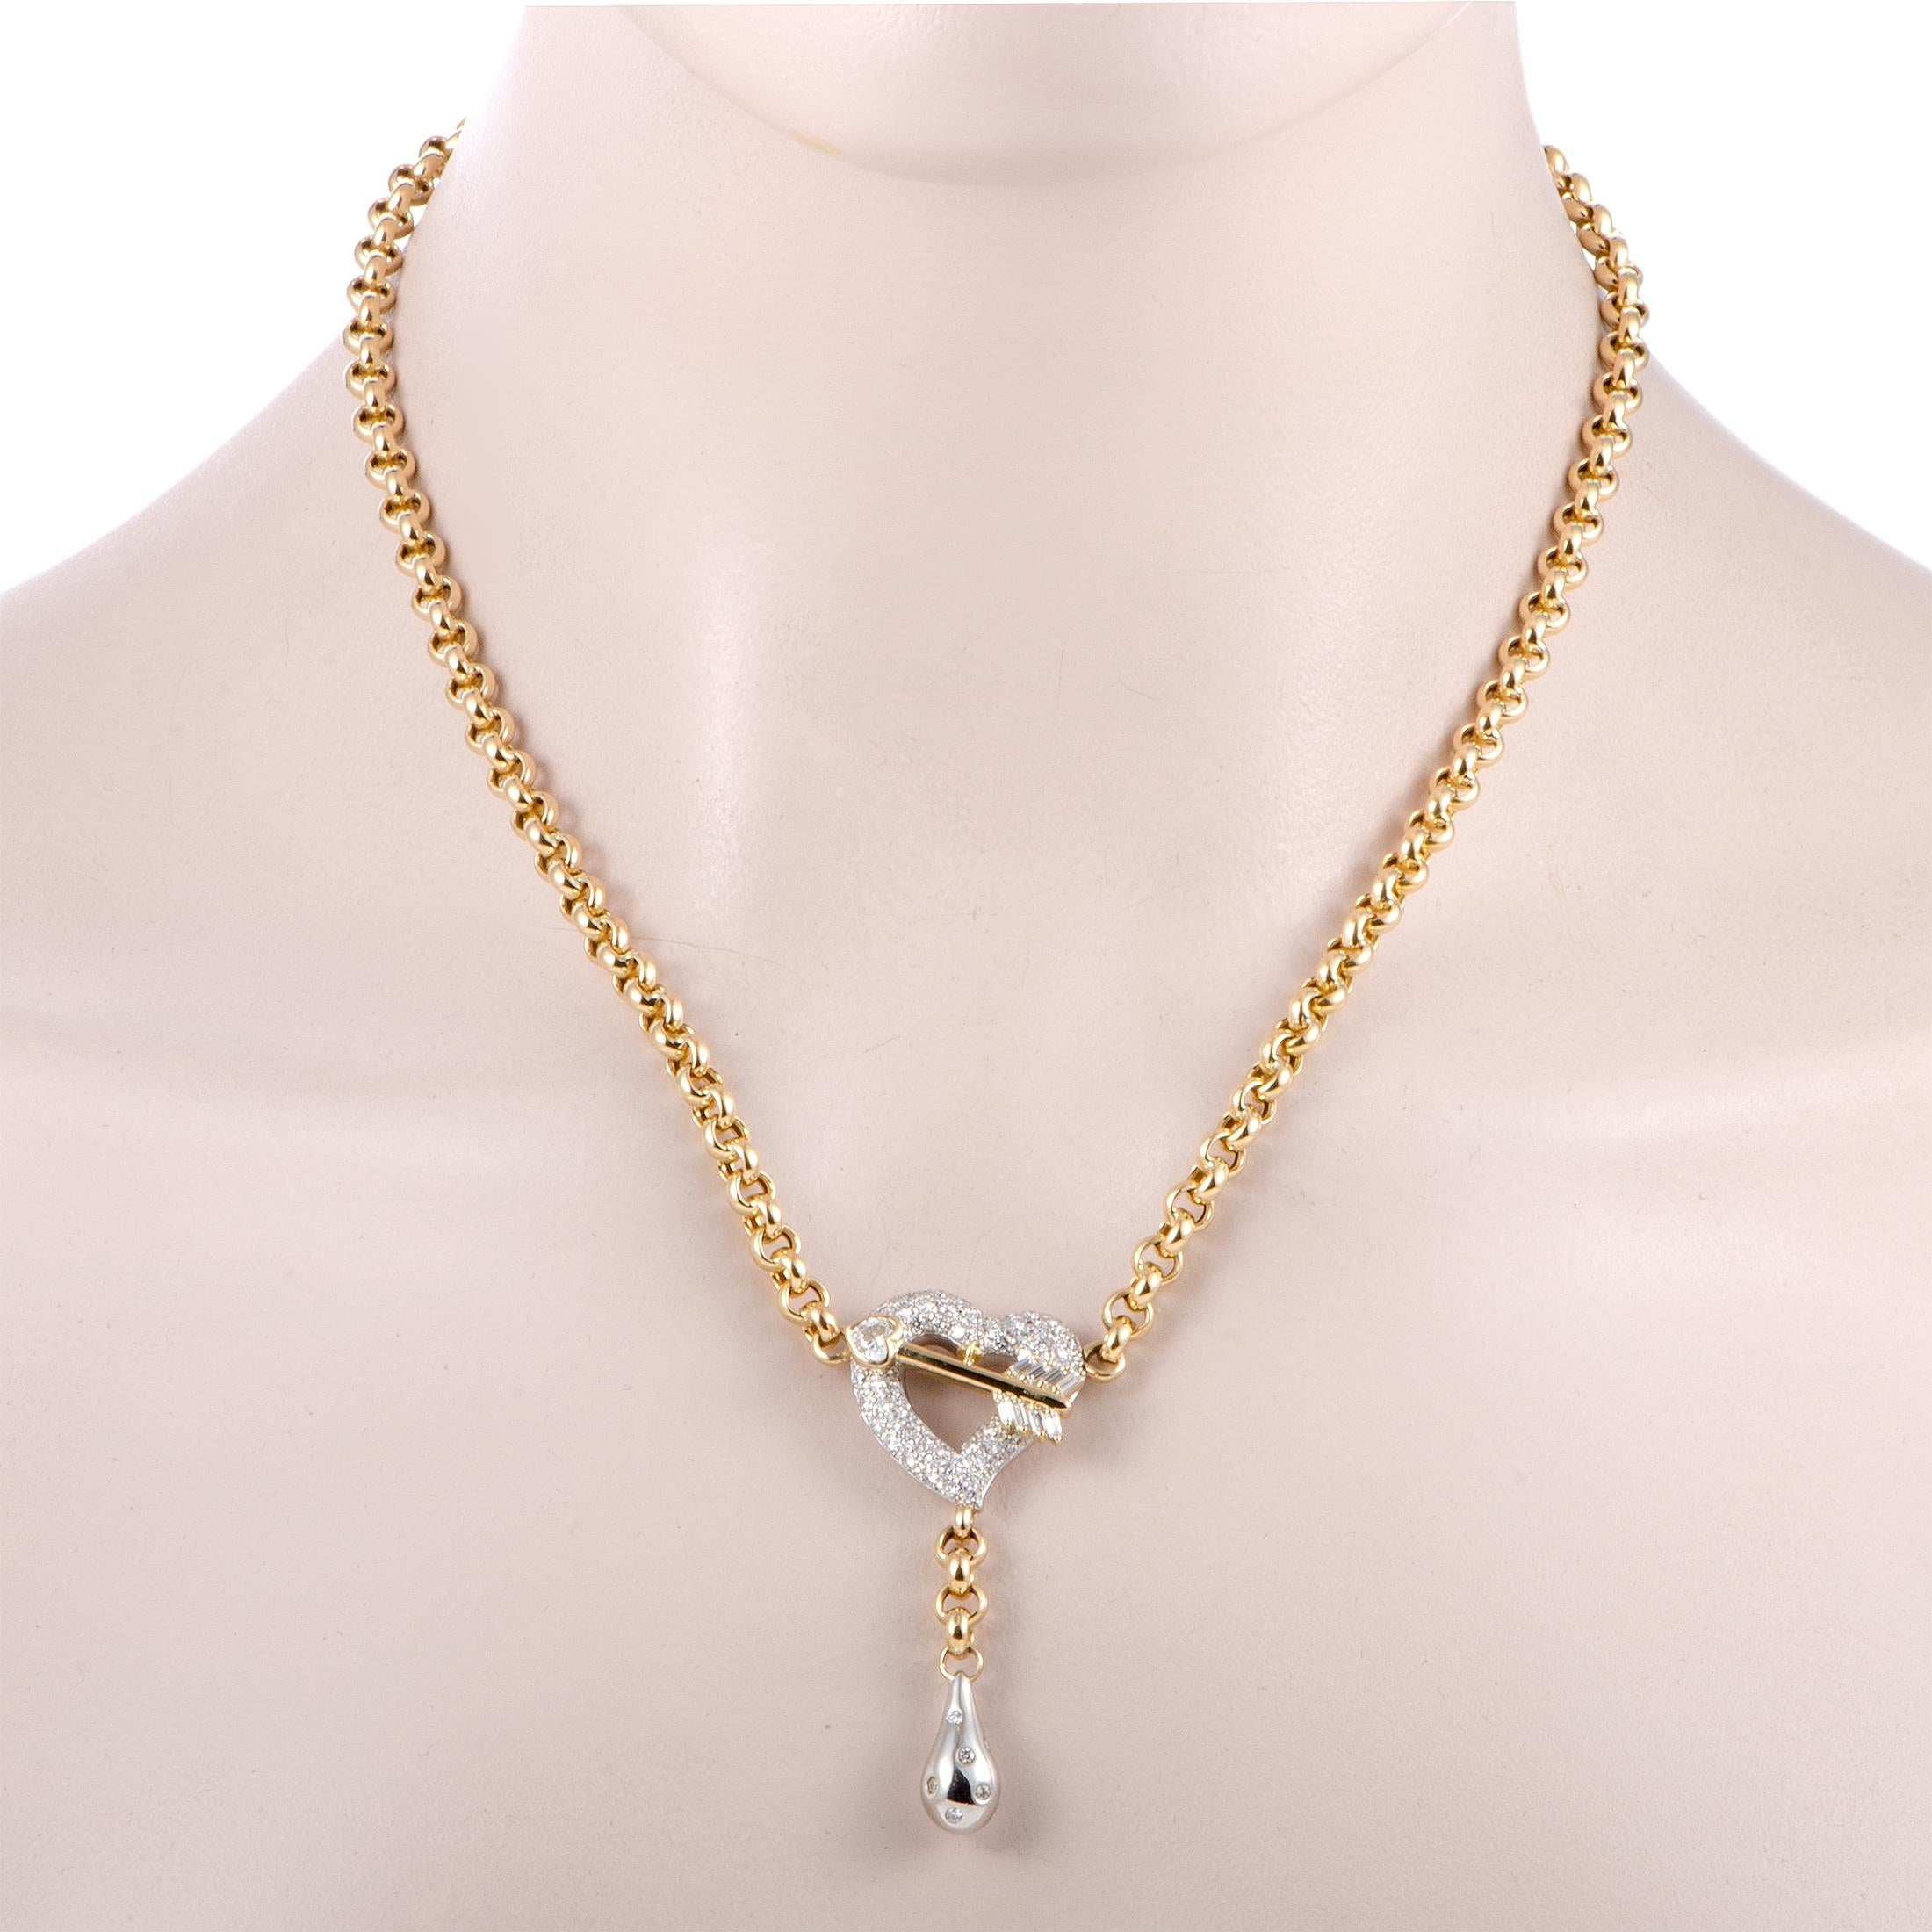 Masterfully crafted from the ever-prestigious blend of classy 18K yellow gold and elegant 18K white gold, this exceptional UnoAErre necklace offers a stunningly luxurious look. The necklace is embellished with a plethora of nearly colorless (grade